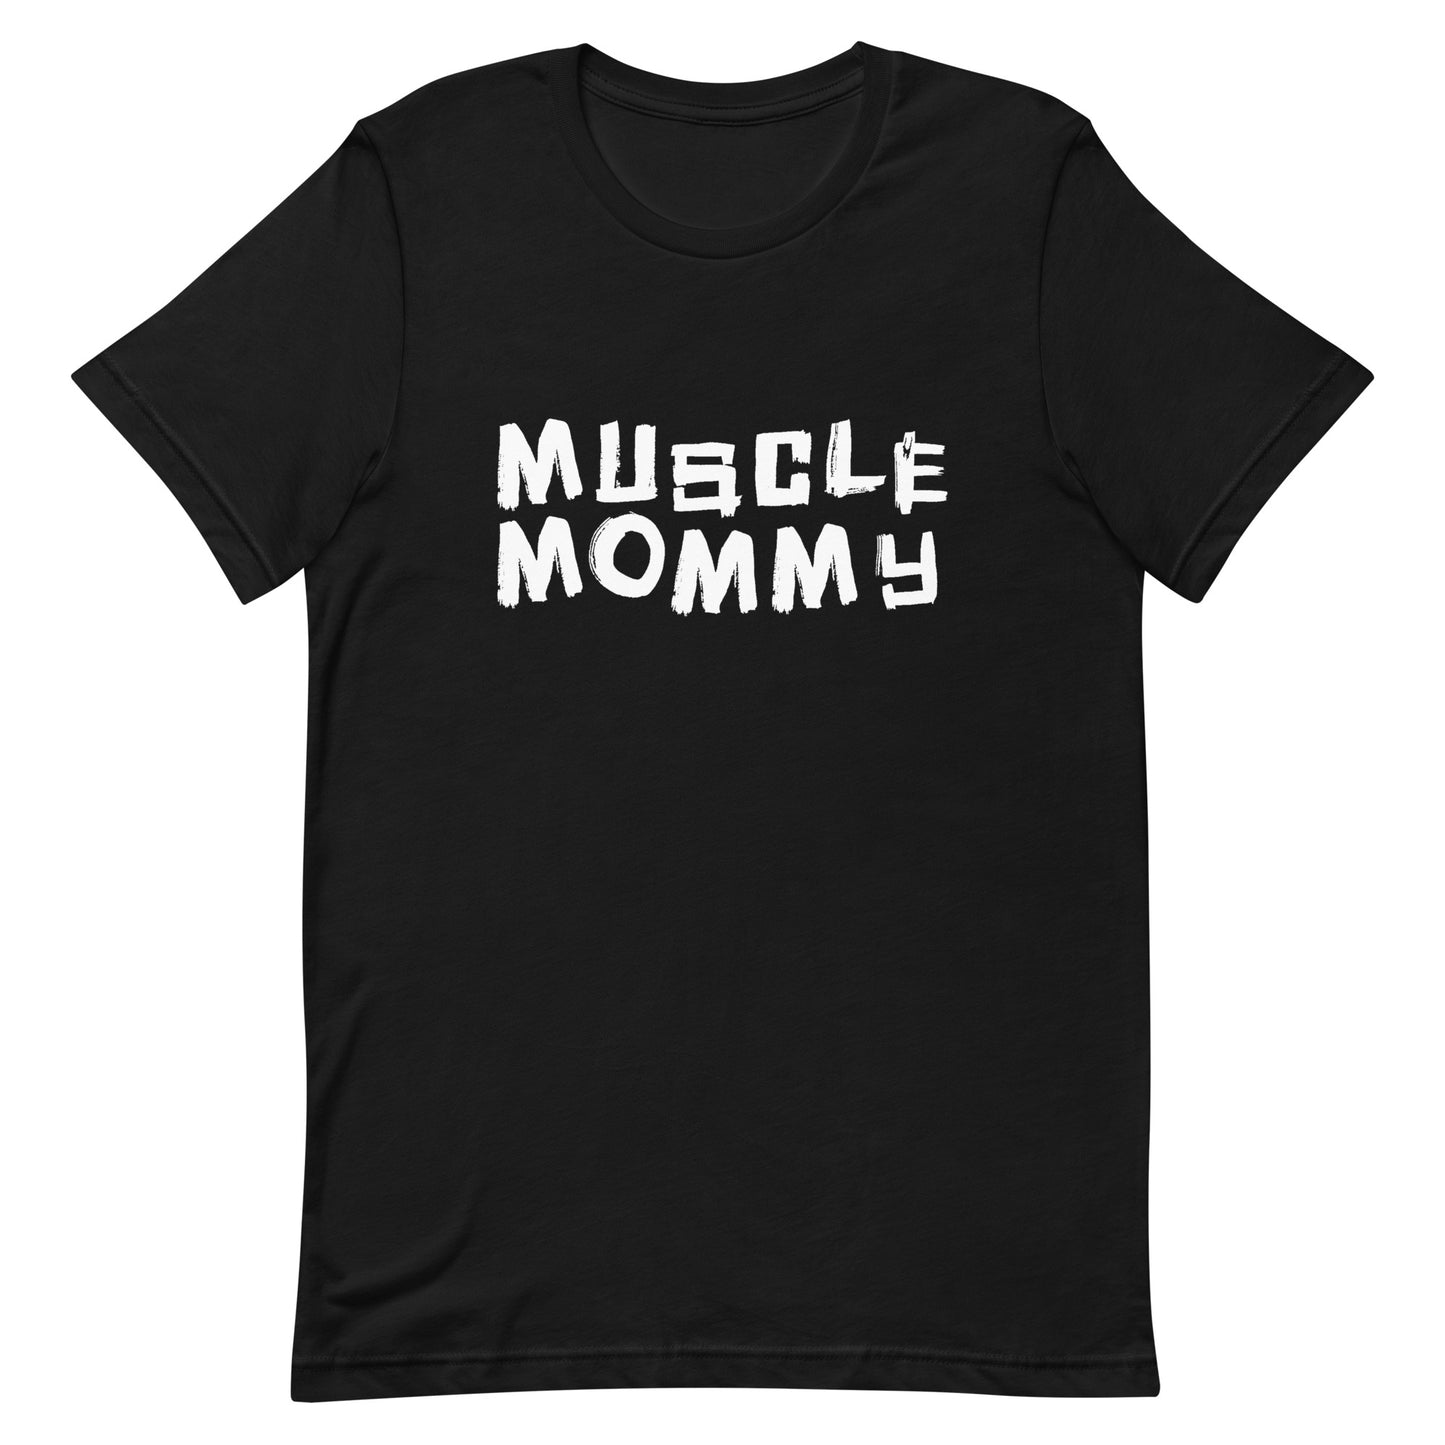 Muscle Mommy Unisex t-shirt